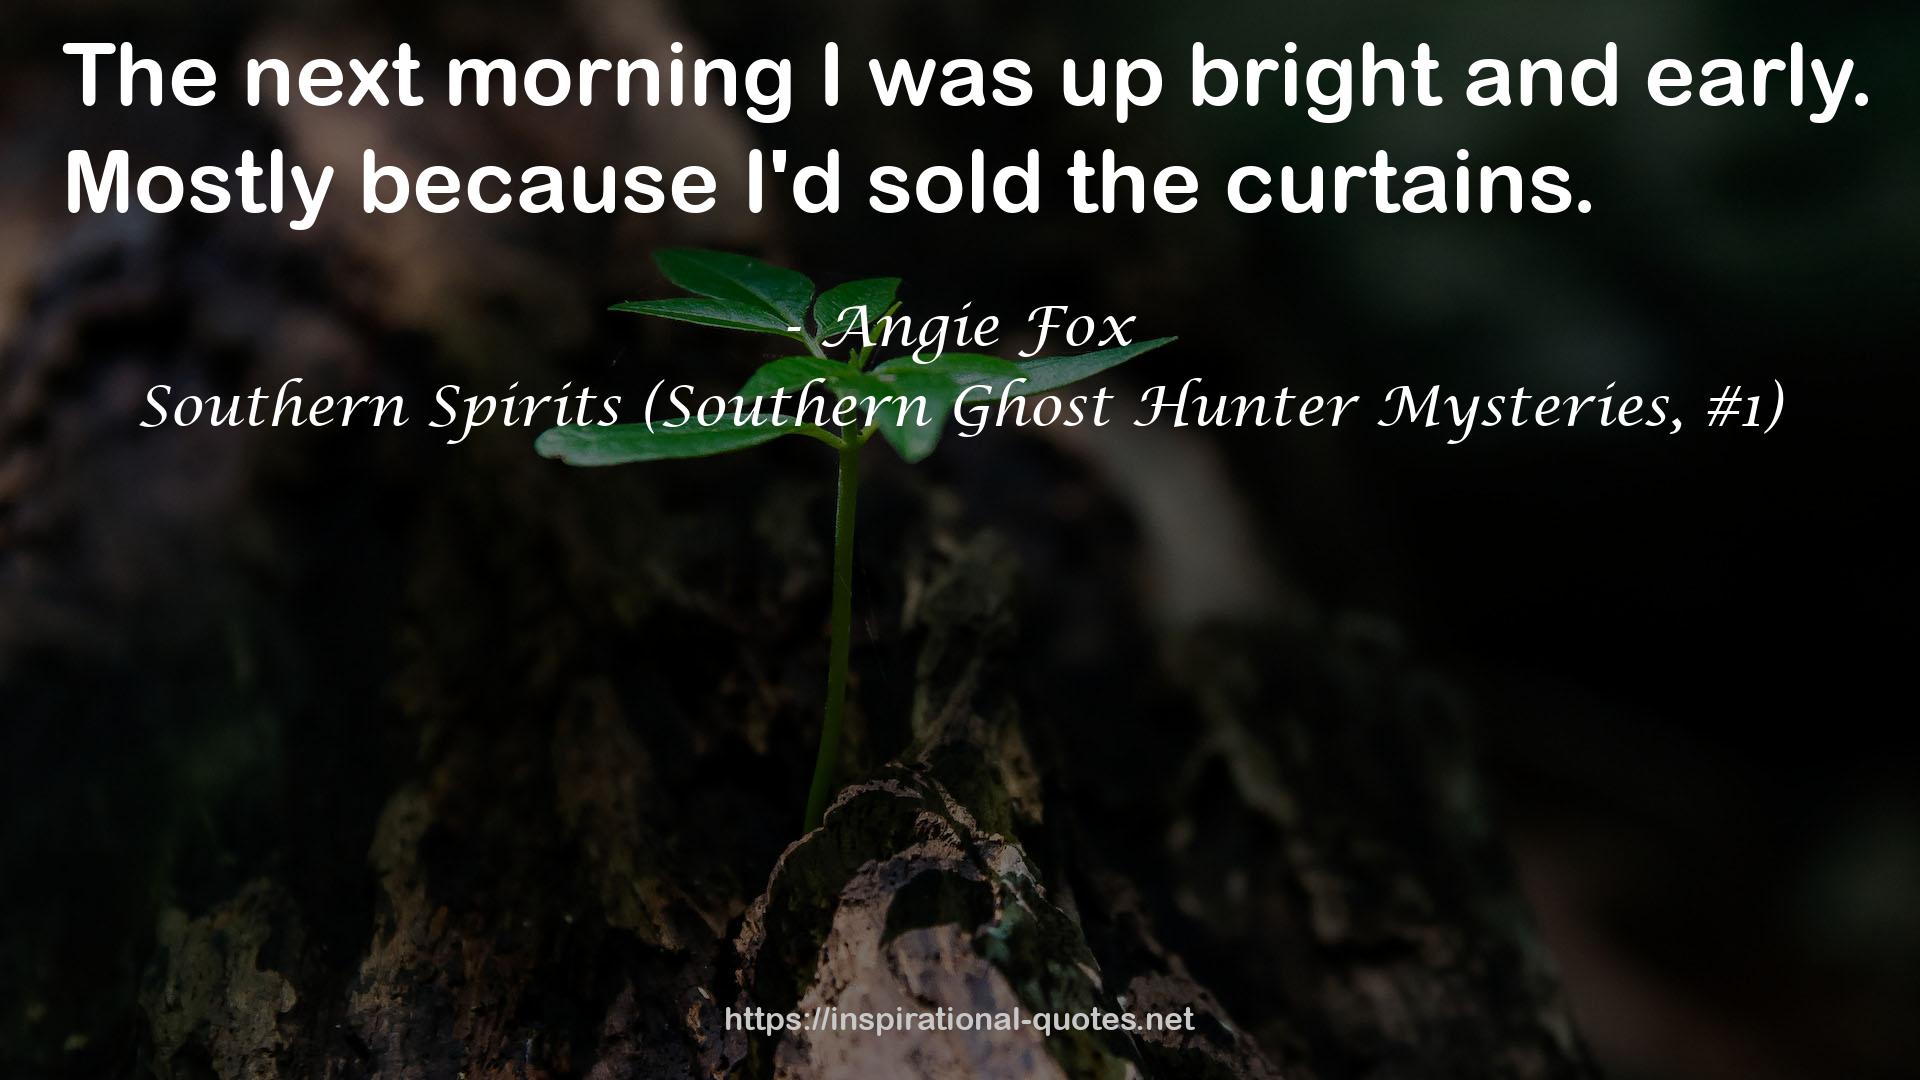 Southern Spirits (Southern Ghost Hunter Mysteries, #1) QUOTES